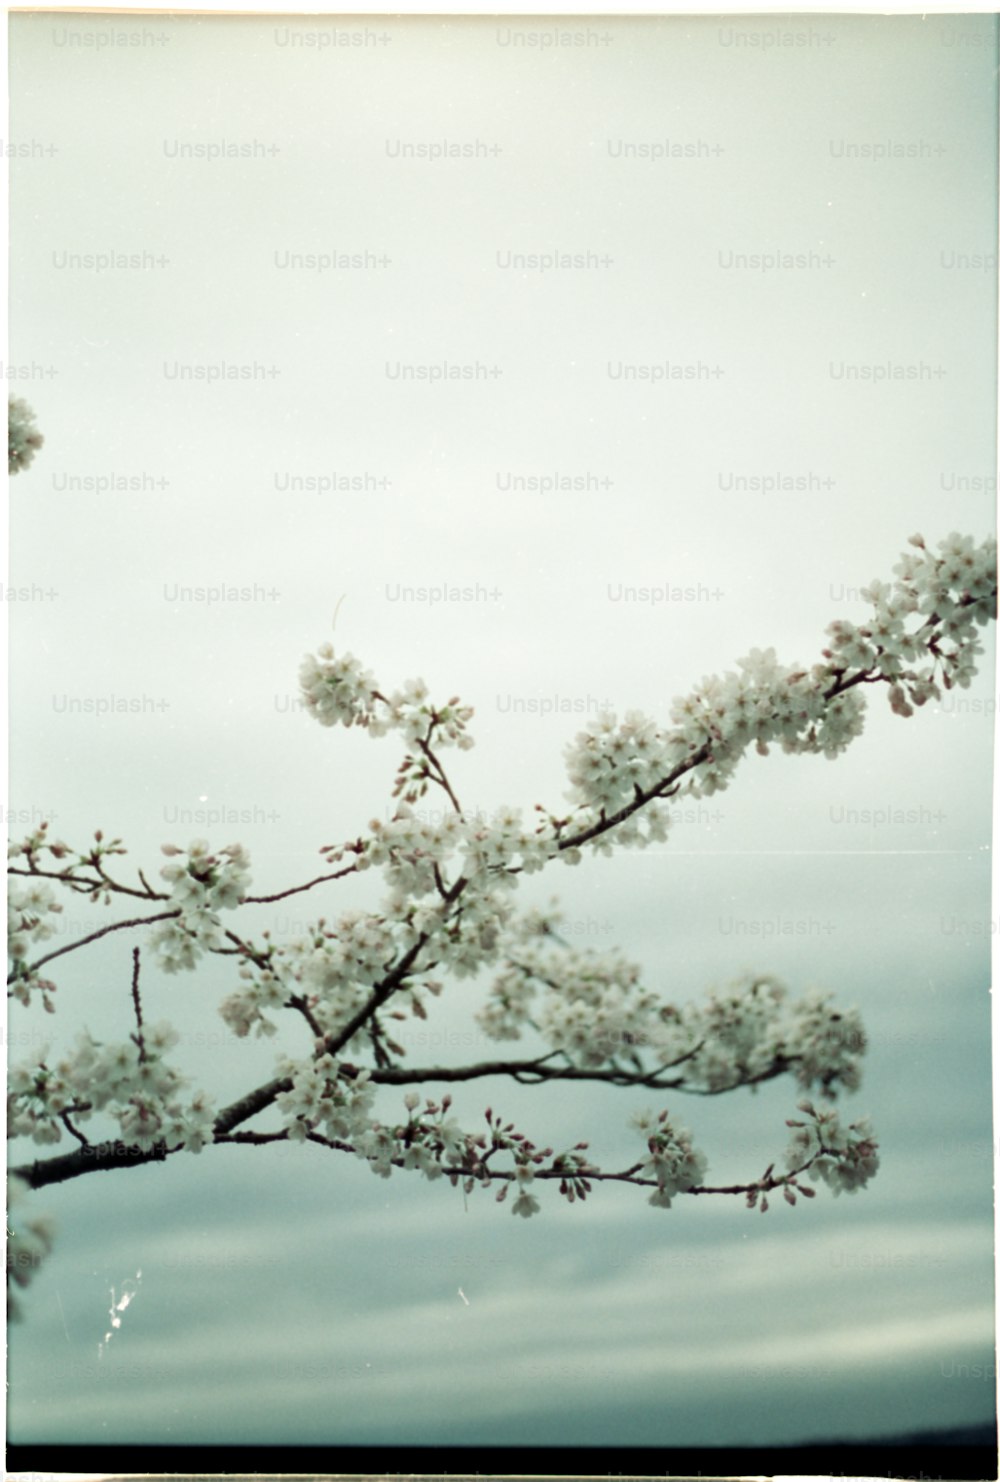 a tree branch with white flowers against a cloudy sky